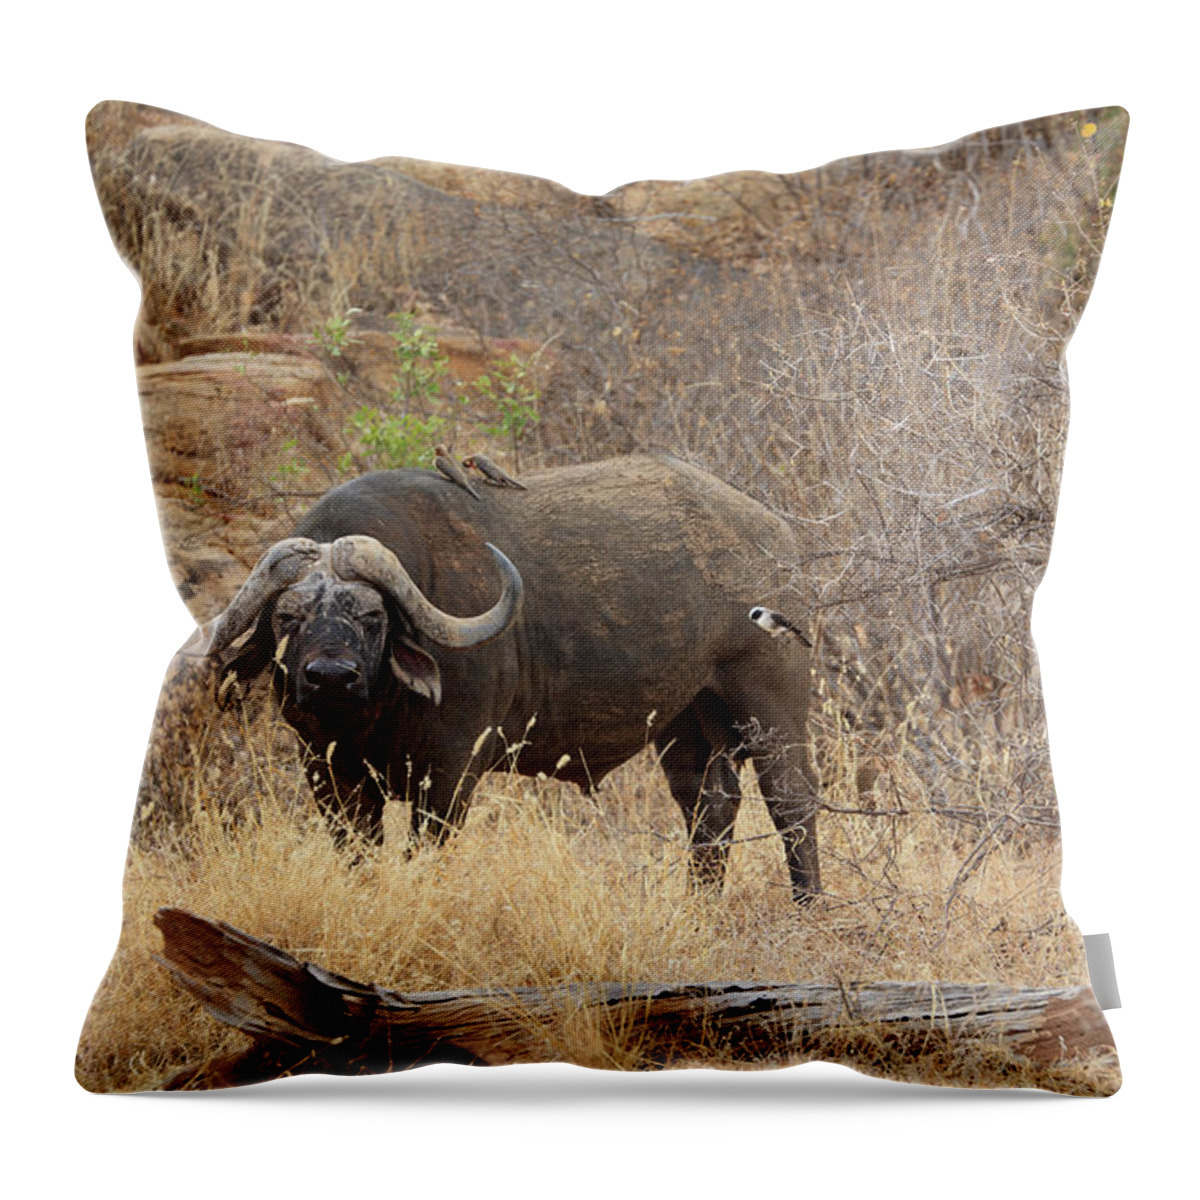 Horned Throw Pillow featuring the photograph African Buffalo,tsavo National Park by Vincenzo Lombardo